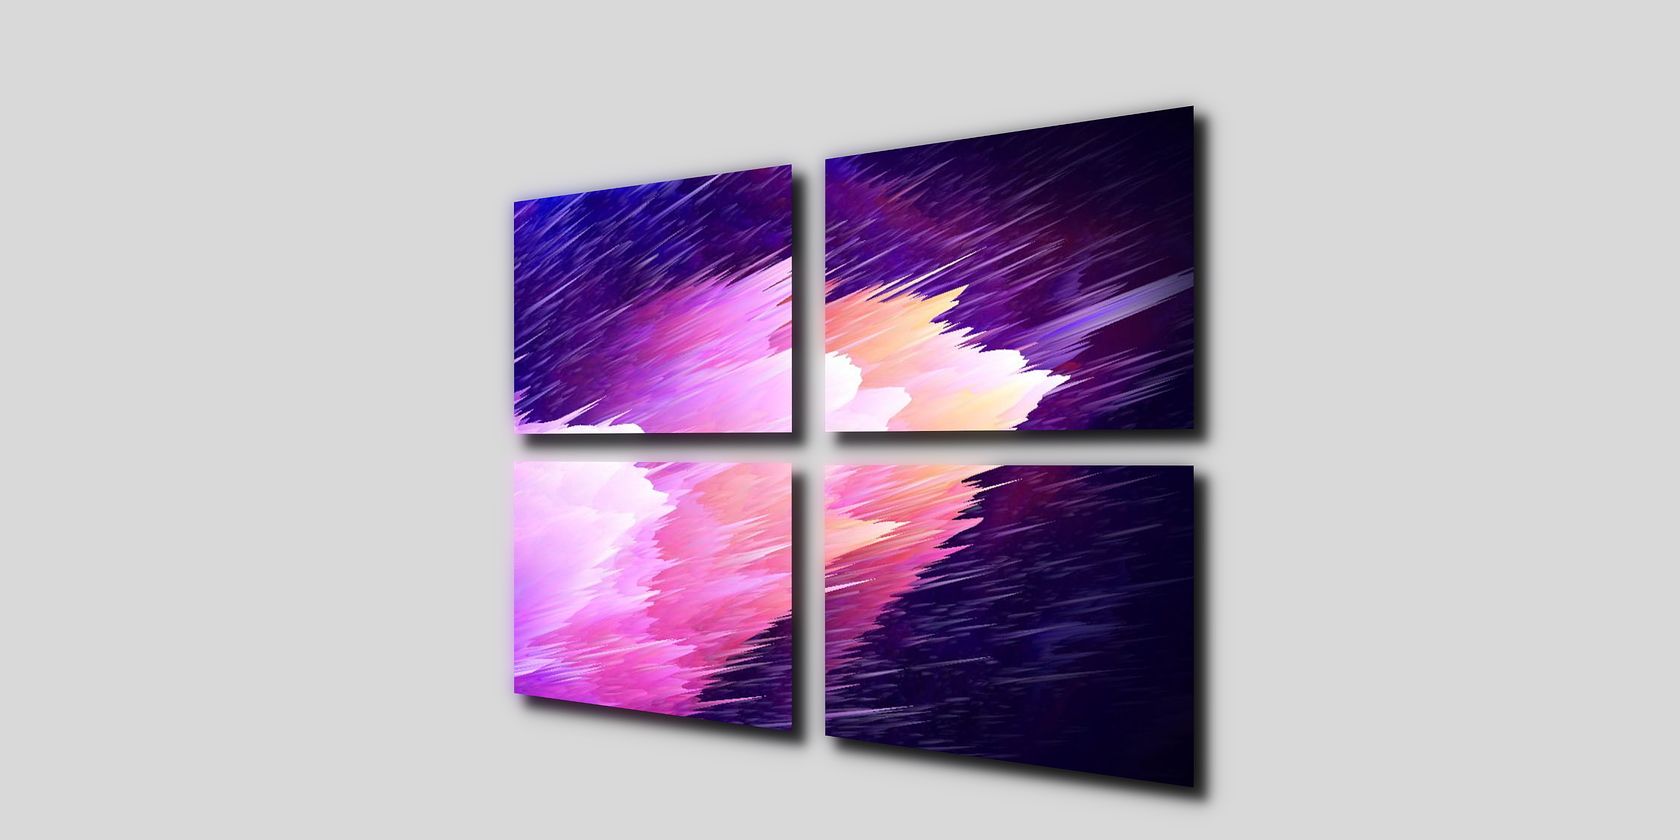 Windows icon with graphic purple and pink design